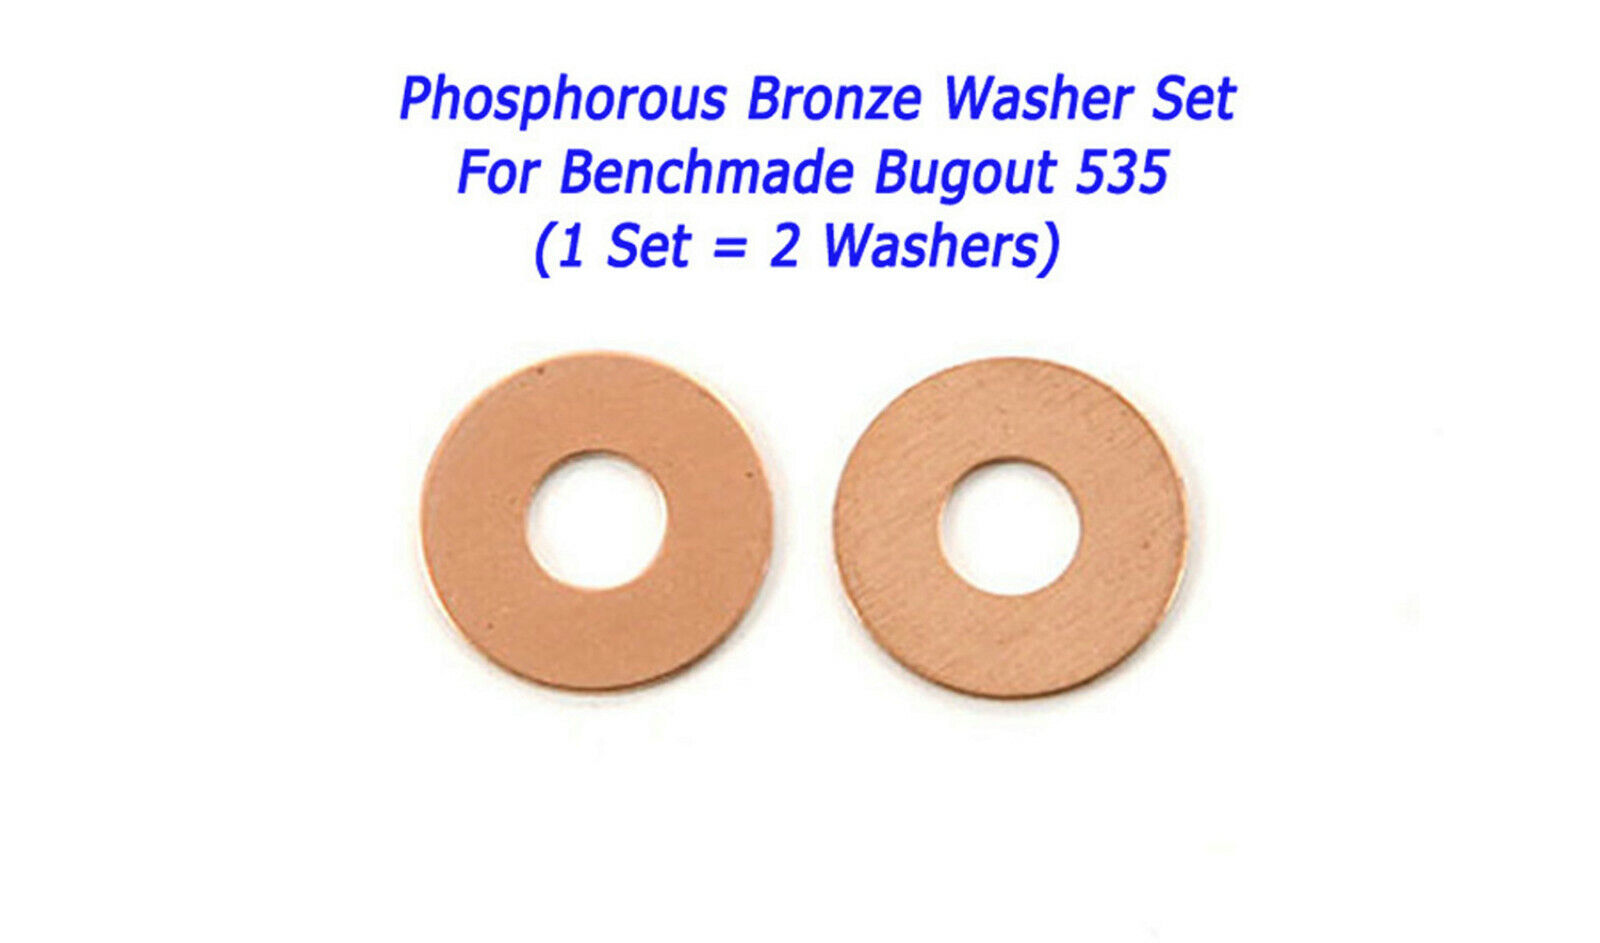 REAL Phosphor Bronze OverSize Washer Set (2 Washers) For Benchmade Bugout & More